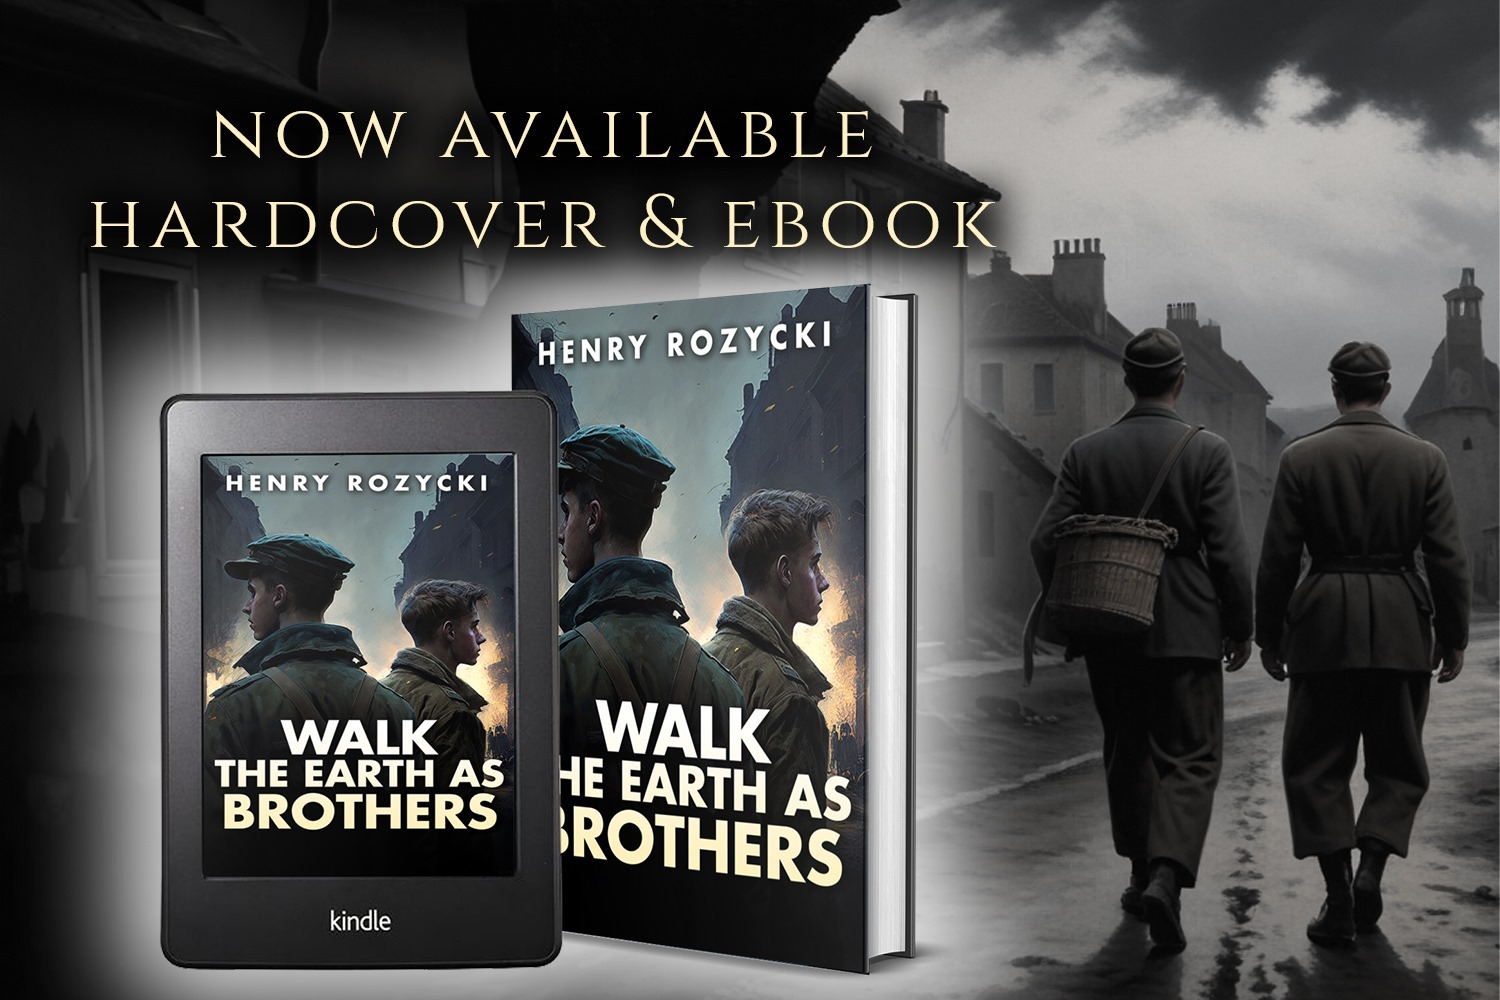 Walk the Earth as Brothers by Henry Rozycki